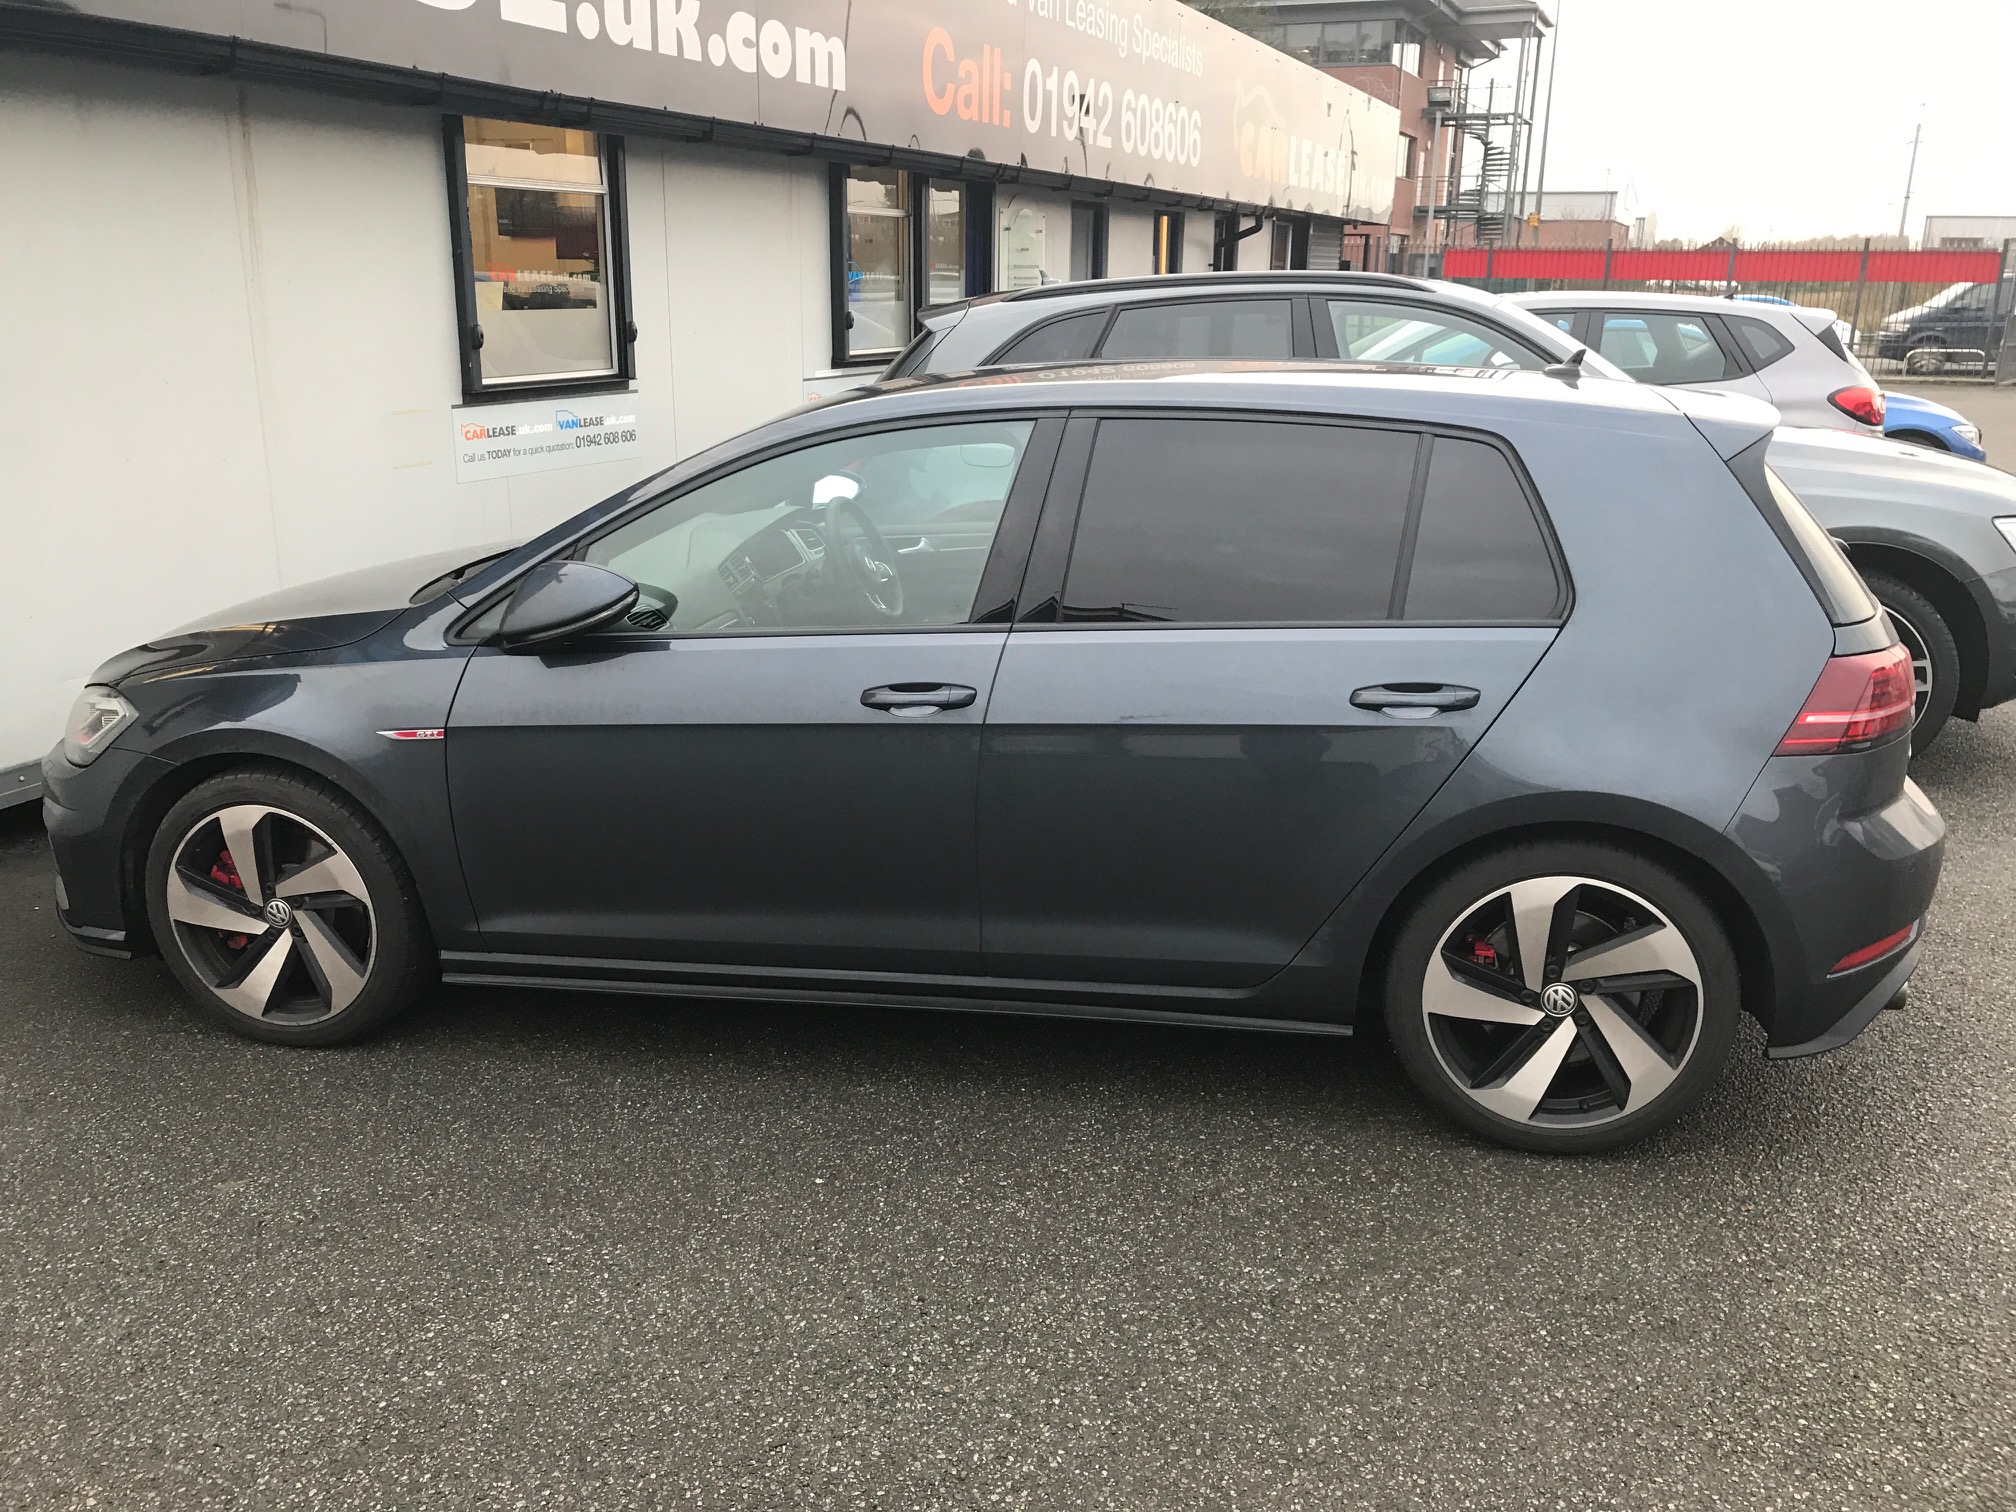 In Review; VW Golf GTI 2.0 TSI (245ps) Performance Auto - CarLease UK